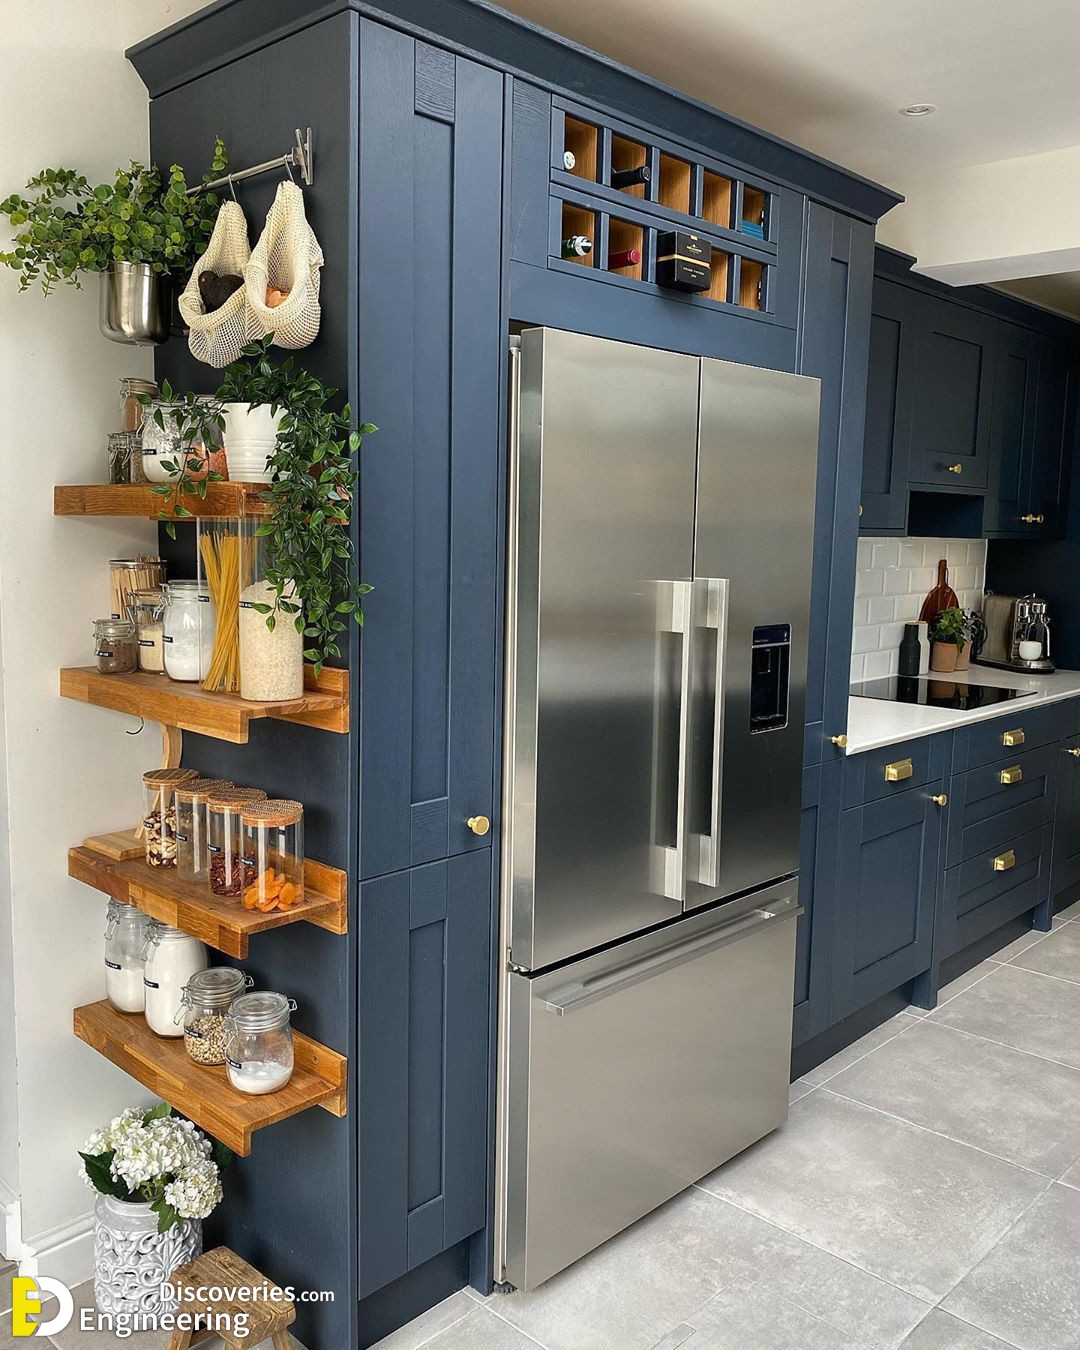 https://engineeringdiscoveries.com/wp-content/uploads/2023/09/18-engineering-discoveries-maximize-your-space-brilliant-kitchen-organization-ideas-for-effortless-cabinet-storage.jpg